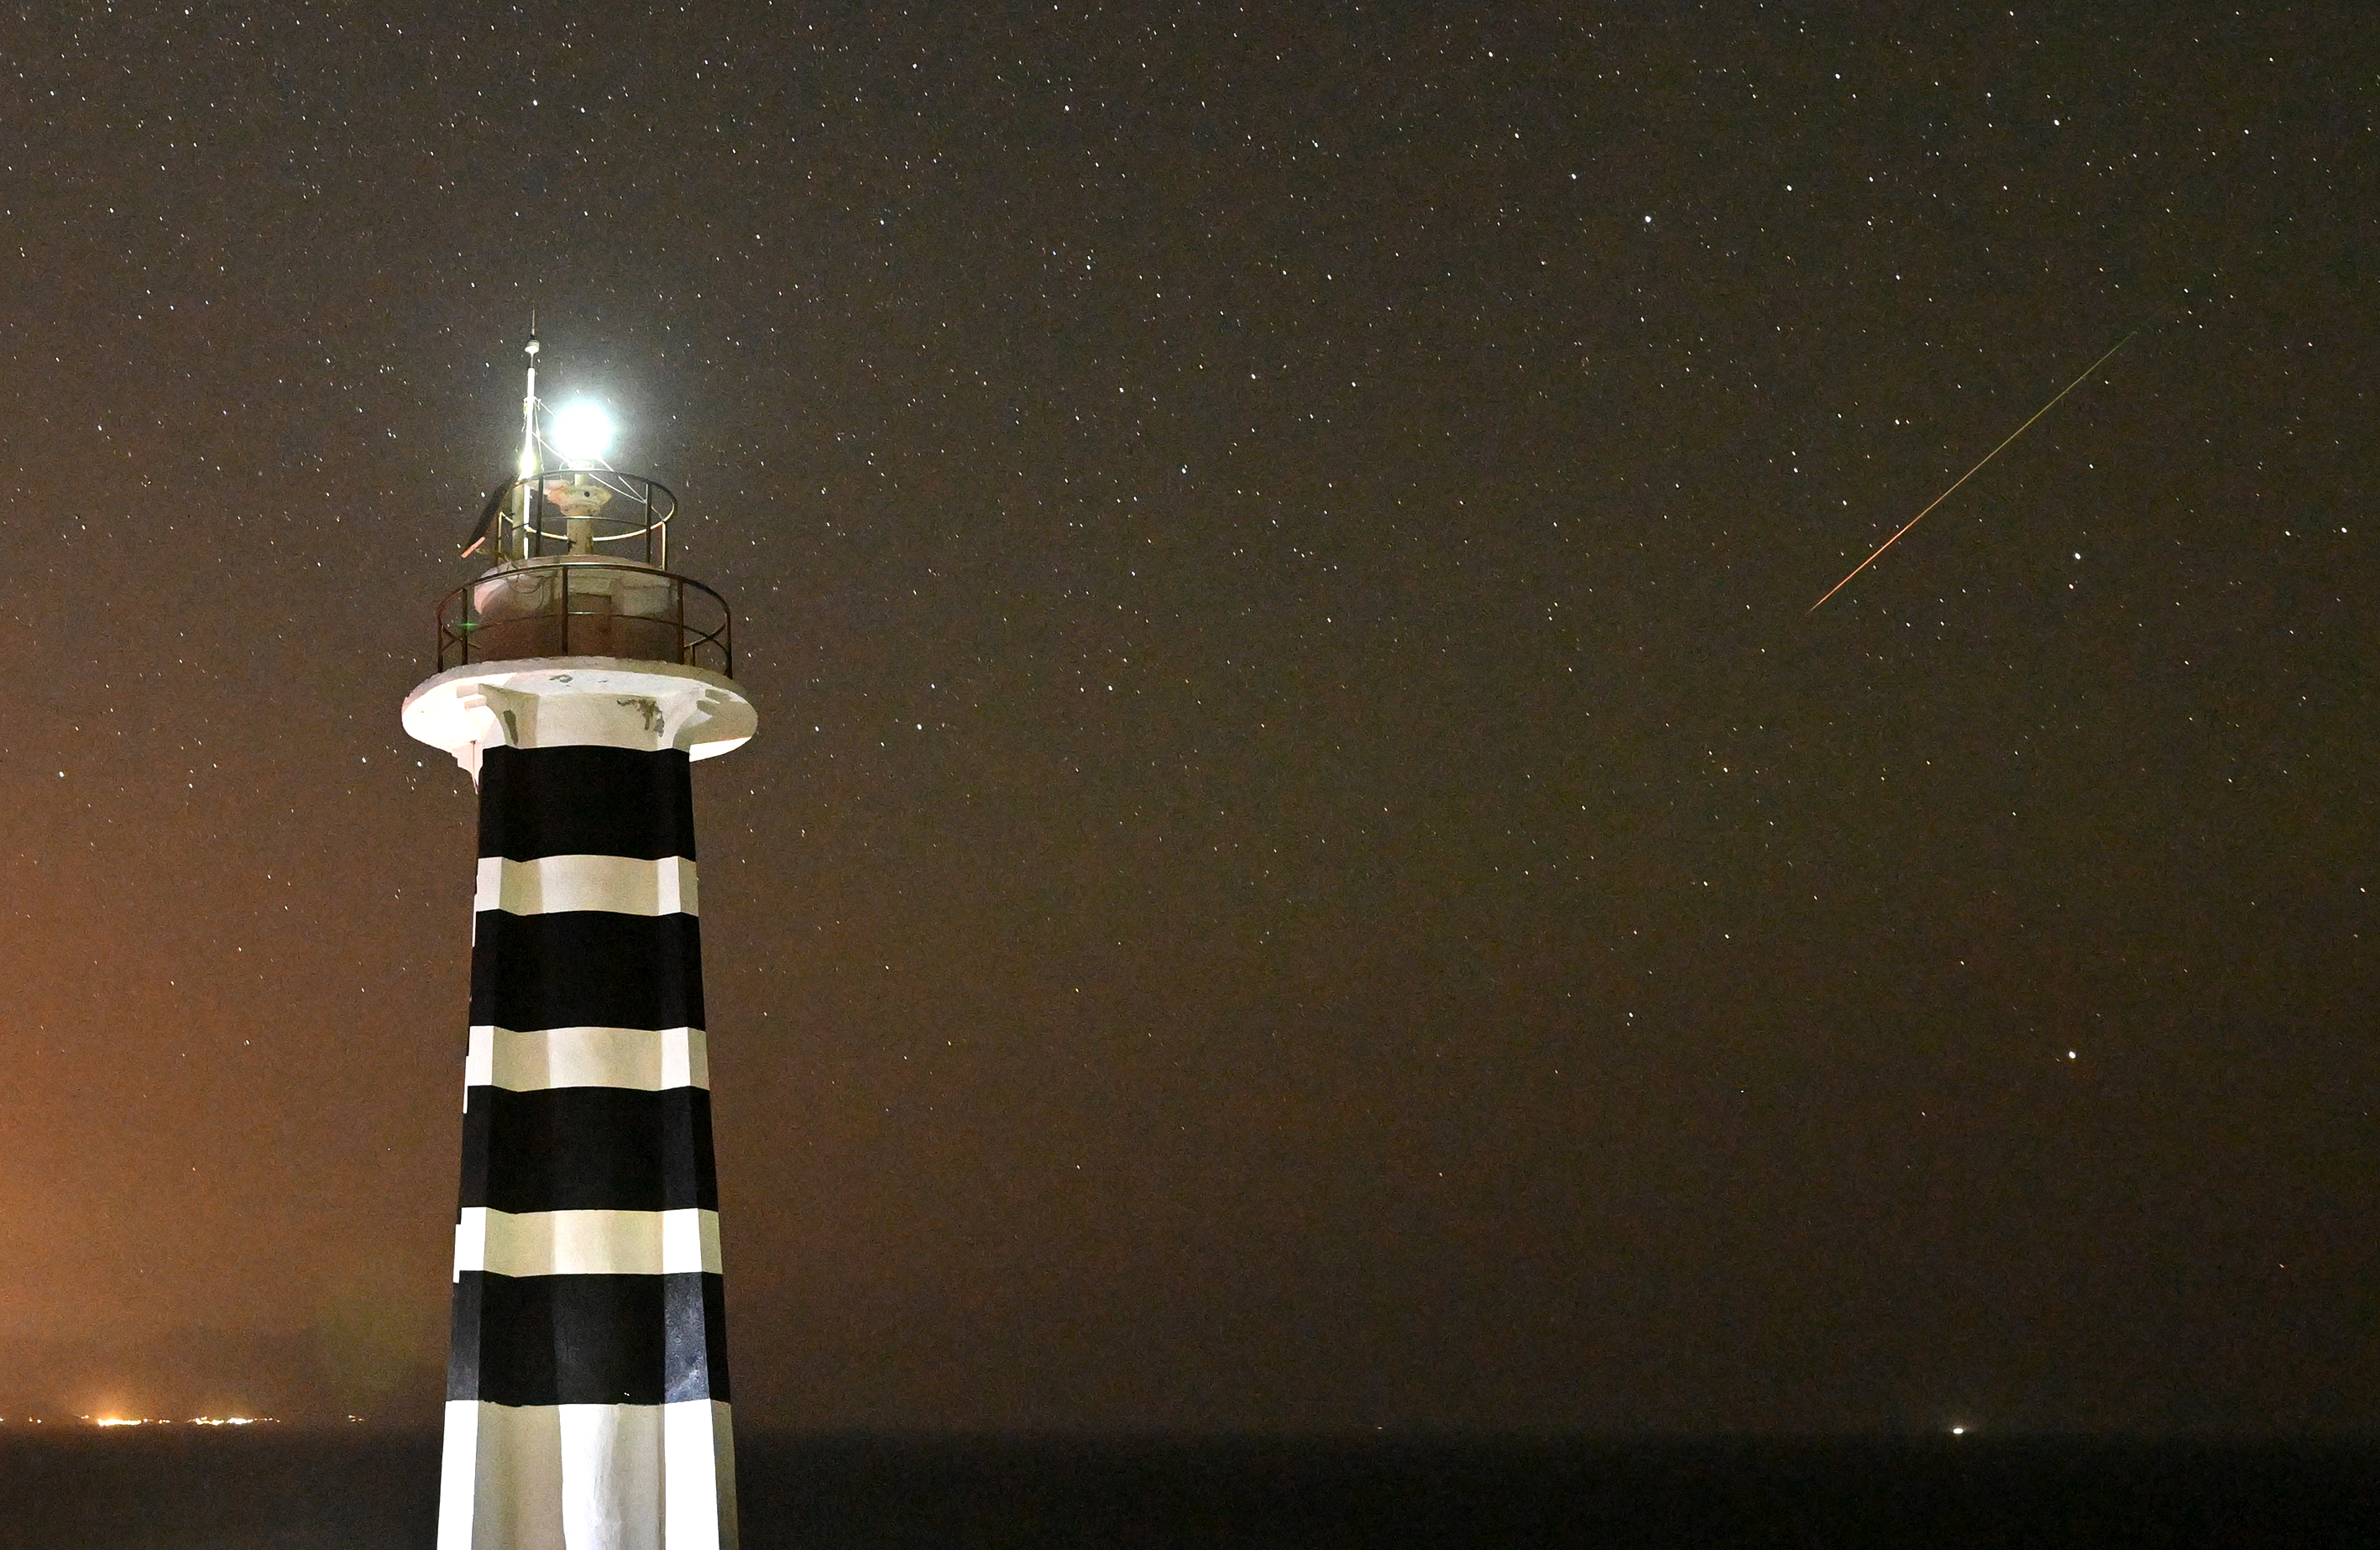 The Perseid meteor on the right and a bright lighthouse with black and white stripes on the left.